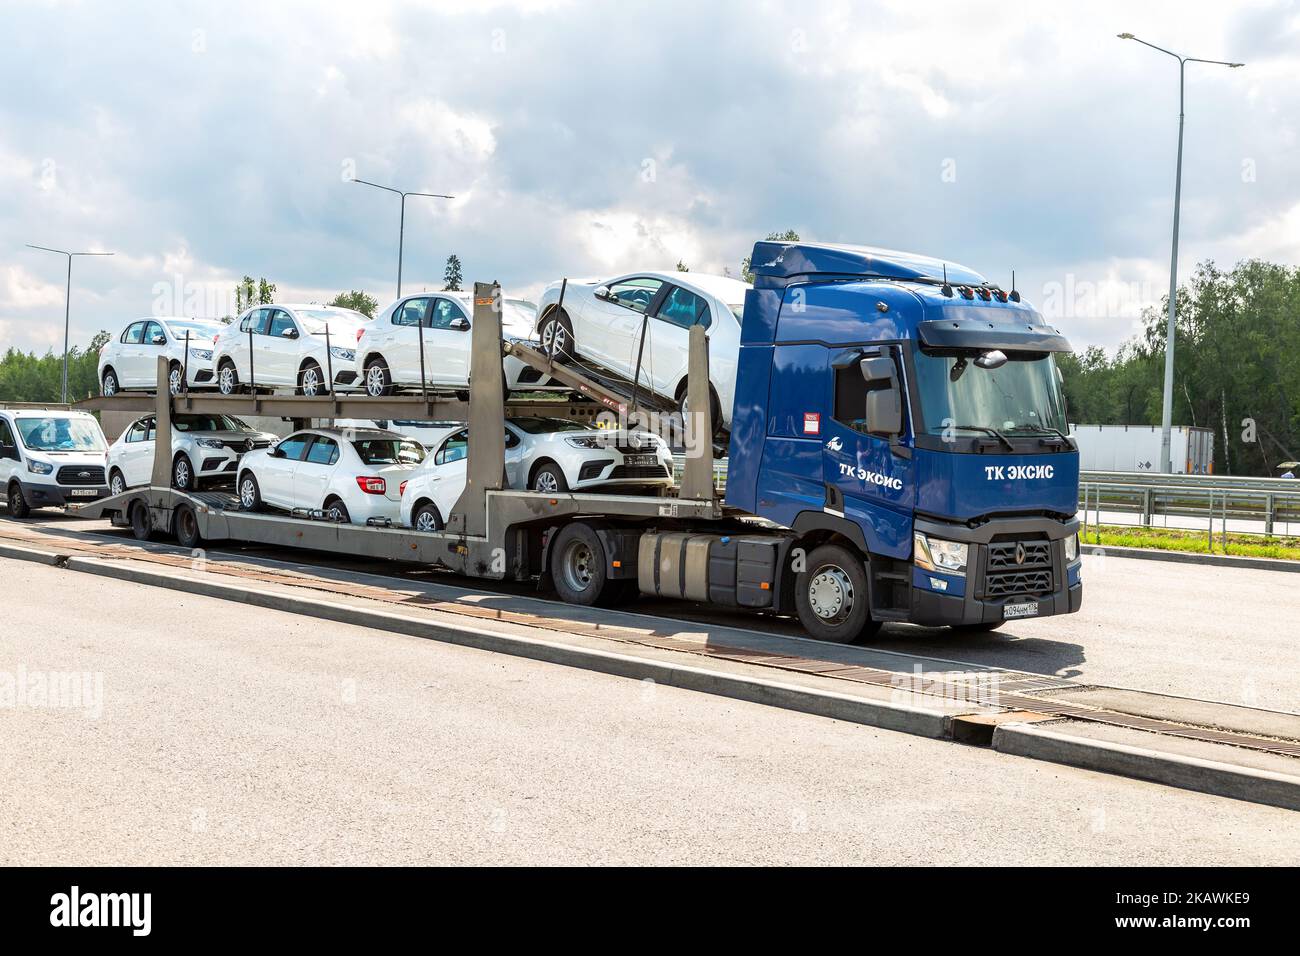 Moscow, Russia - July 12, 2022: Car transporter carries new Renault vehicles along the highway. Car carrier transporter truck on a freeway Stock Photo